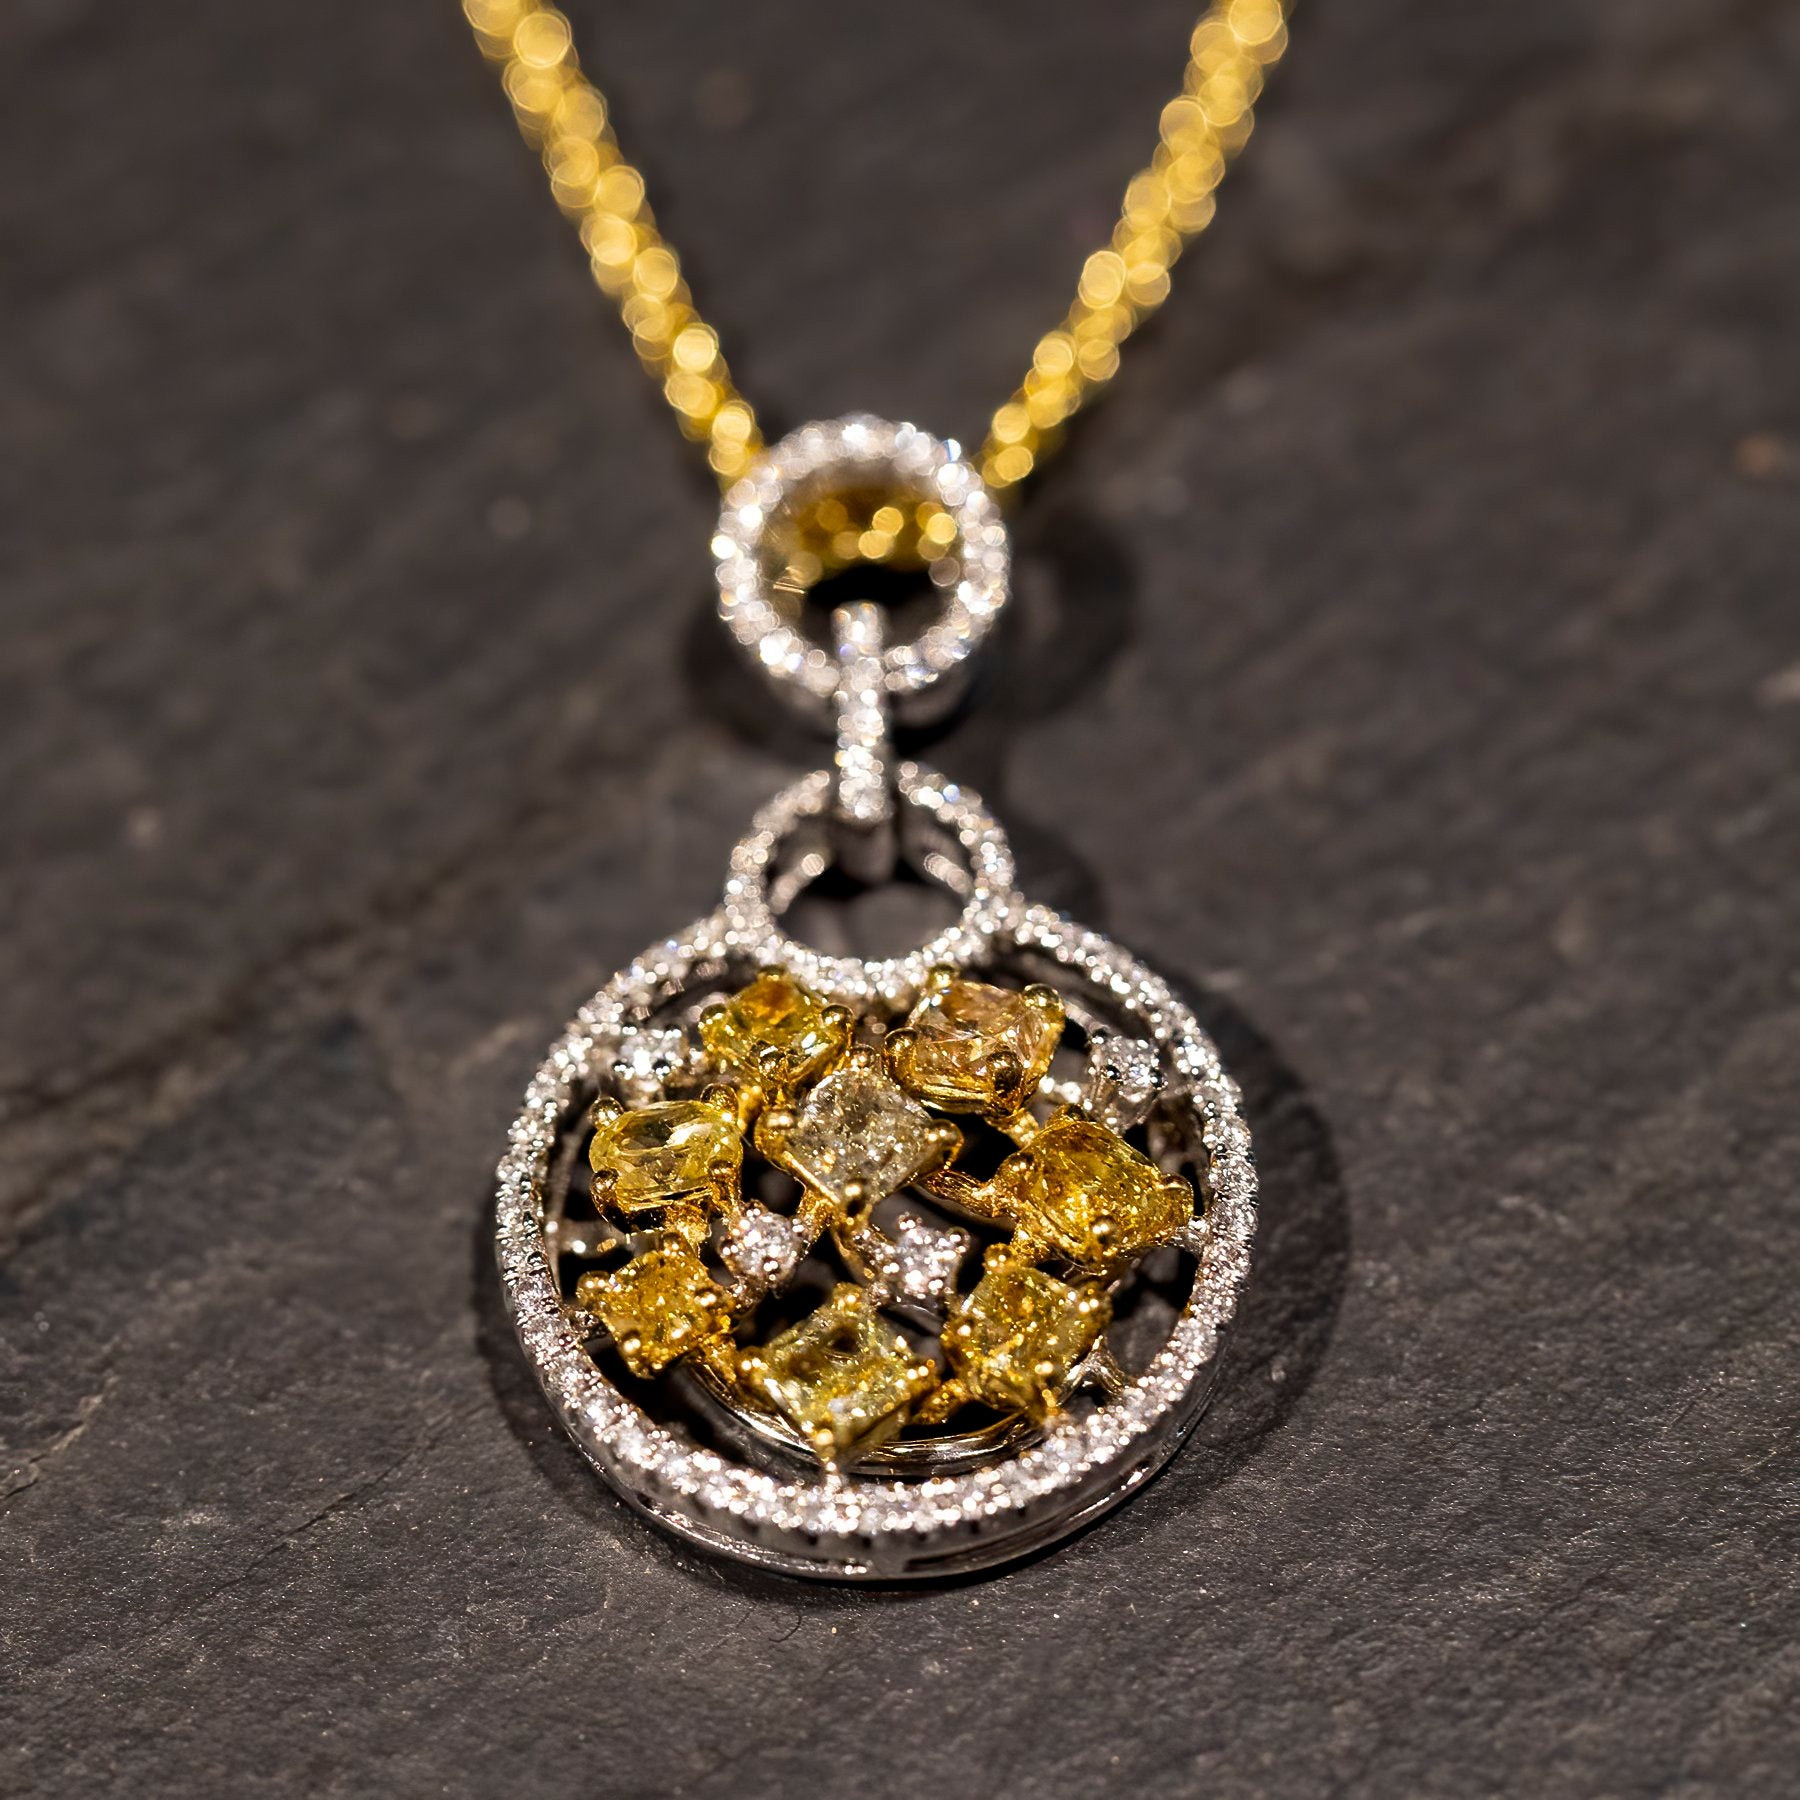 18K White Gold Pendant covered in Yellow and White Diamonds handmade by Jewel in the Sea Nantucket